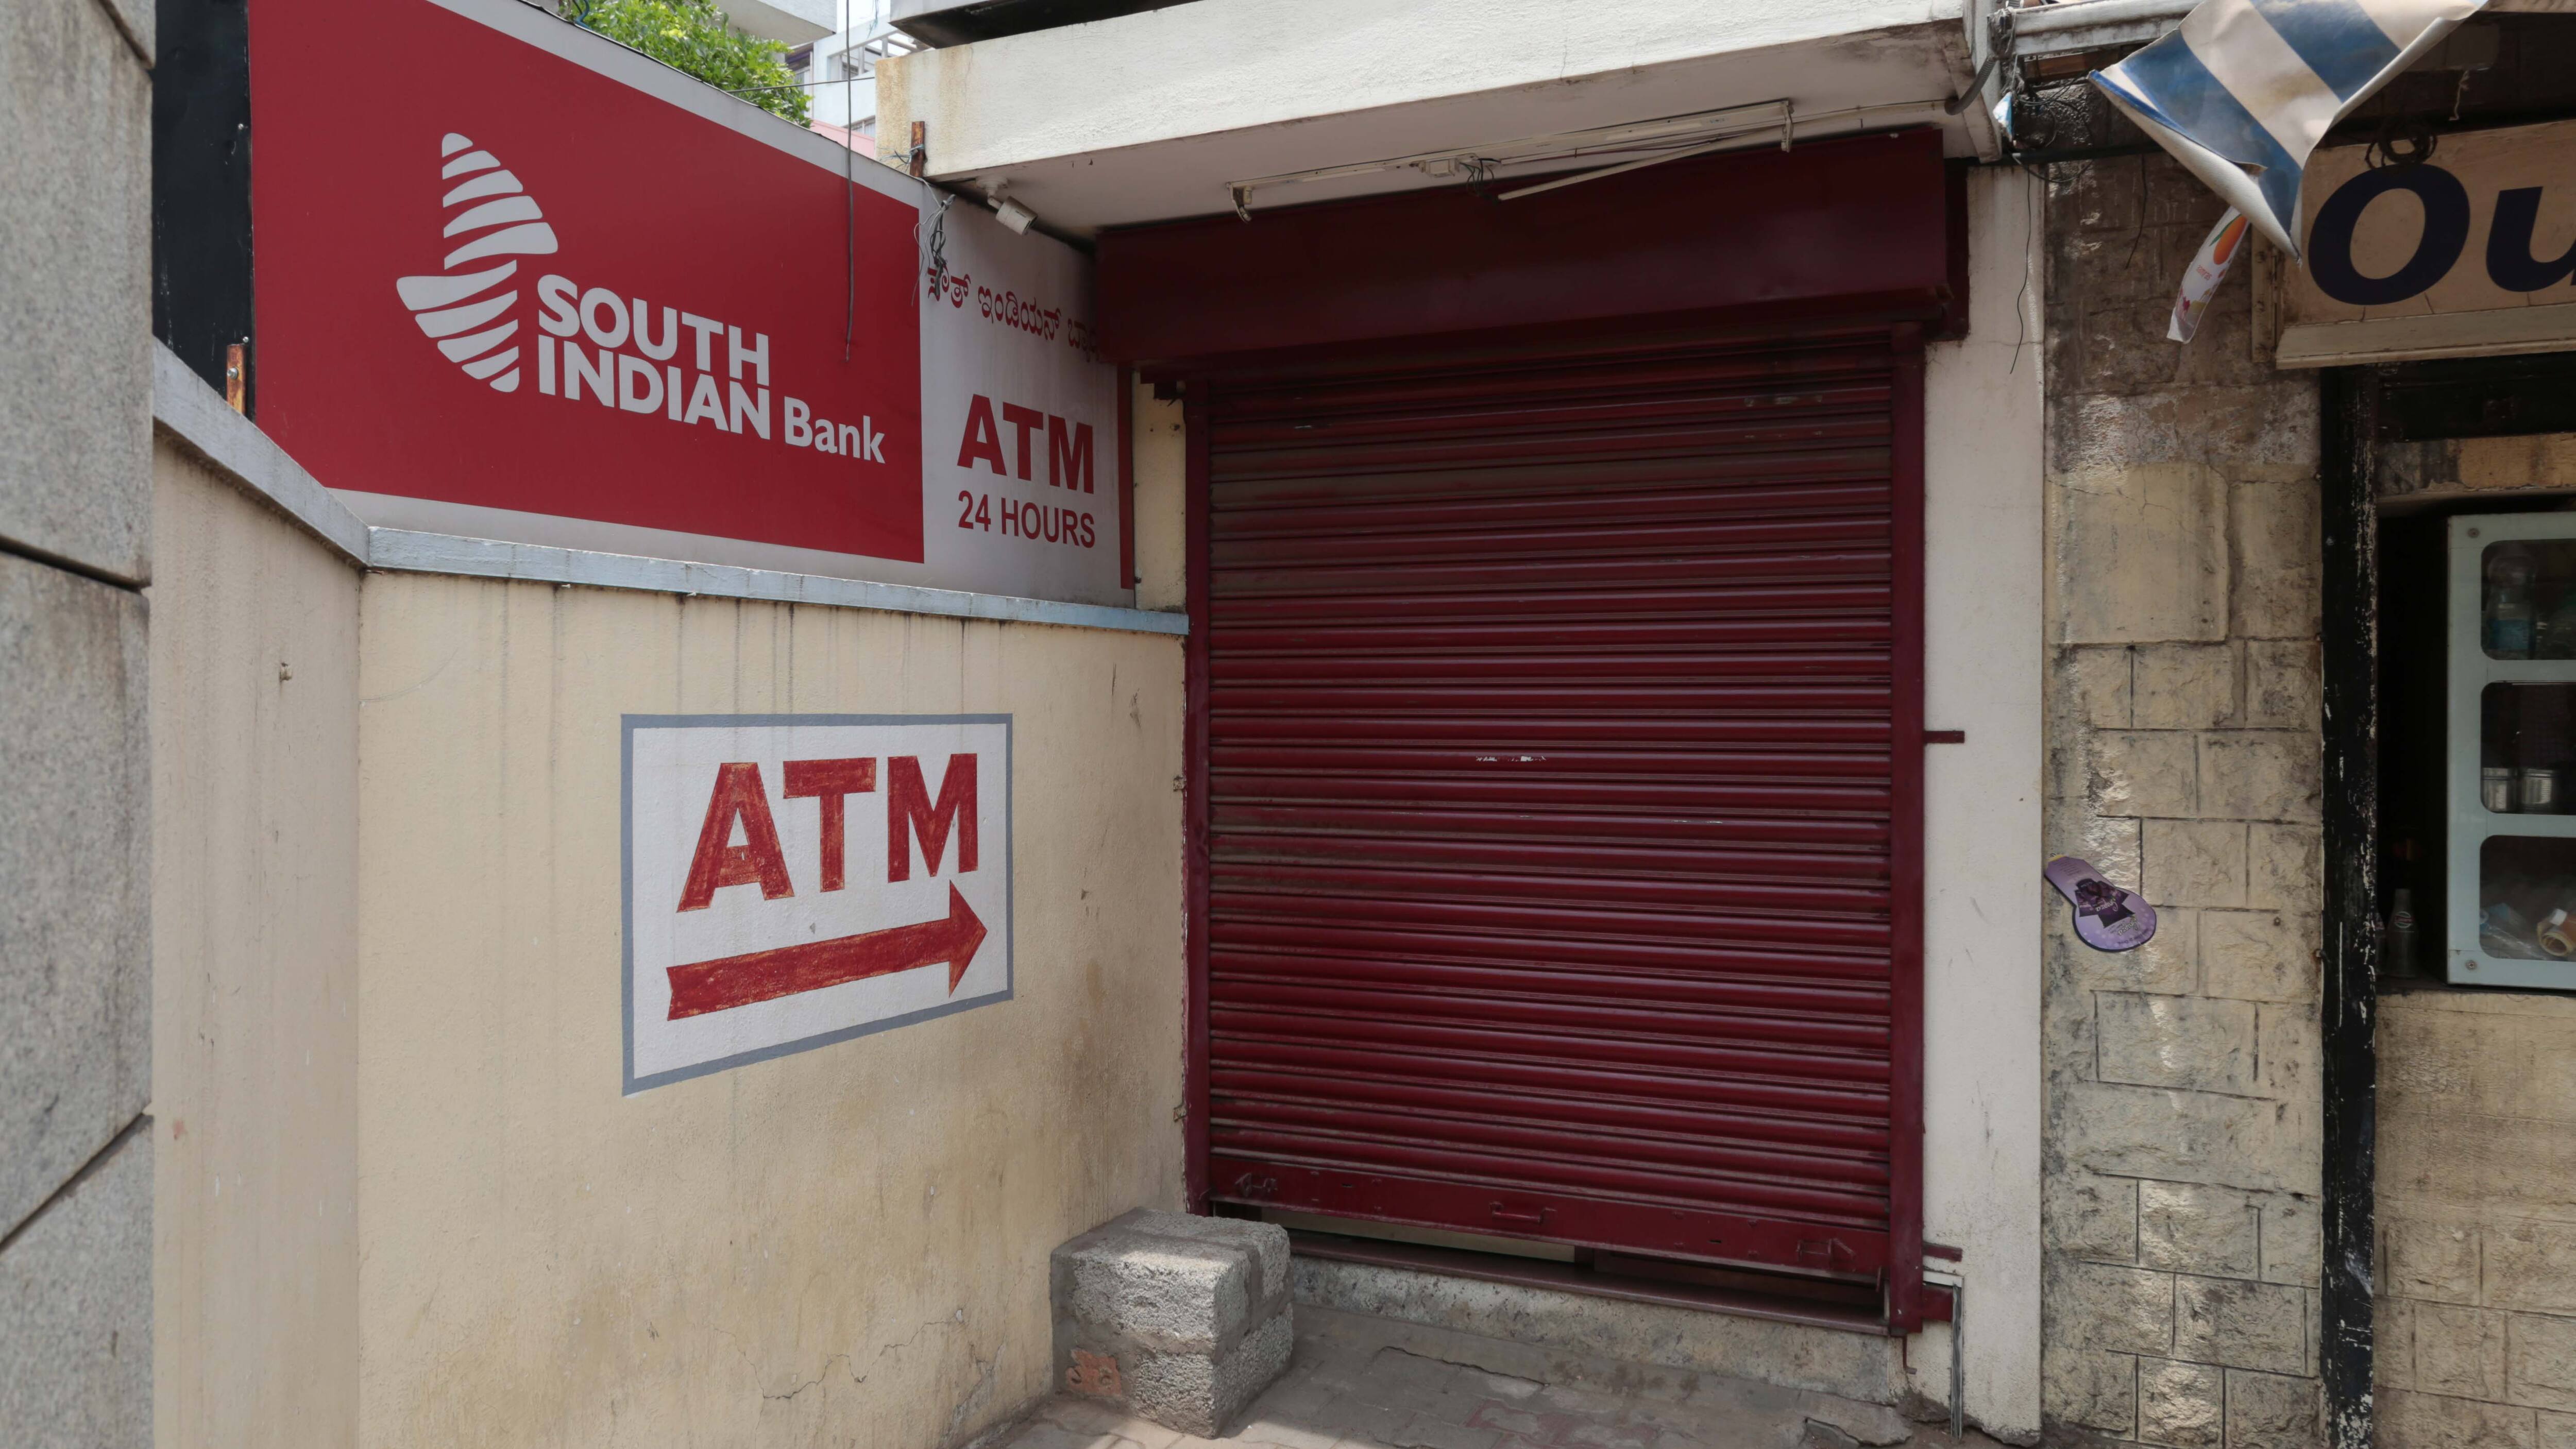 No cash in ATMs in Bengaluru government bringing you in sync with cashless India